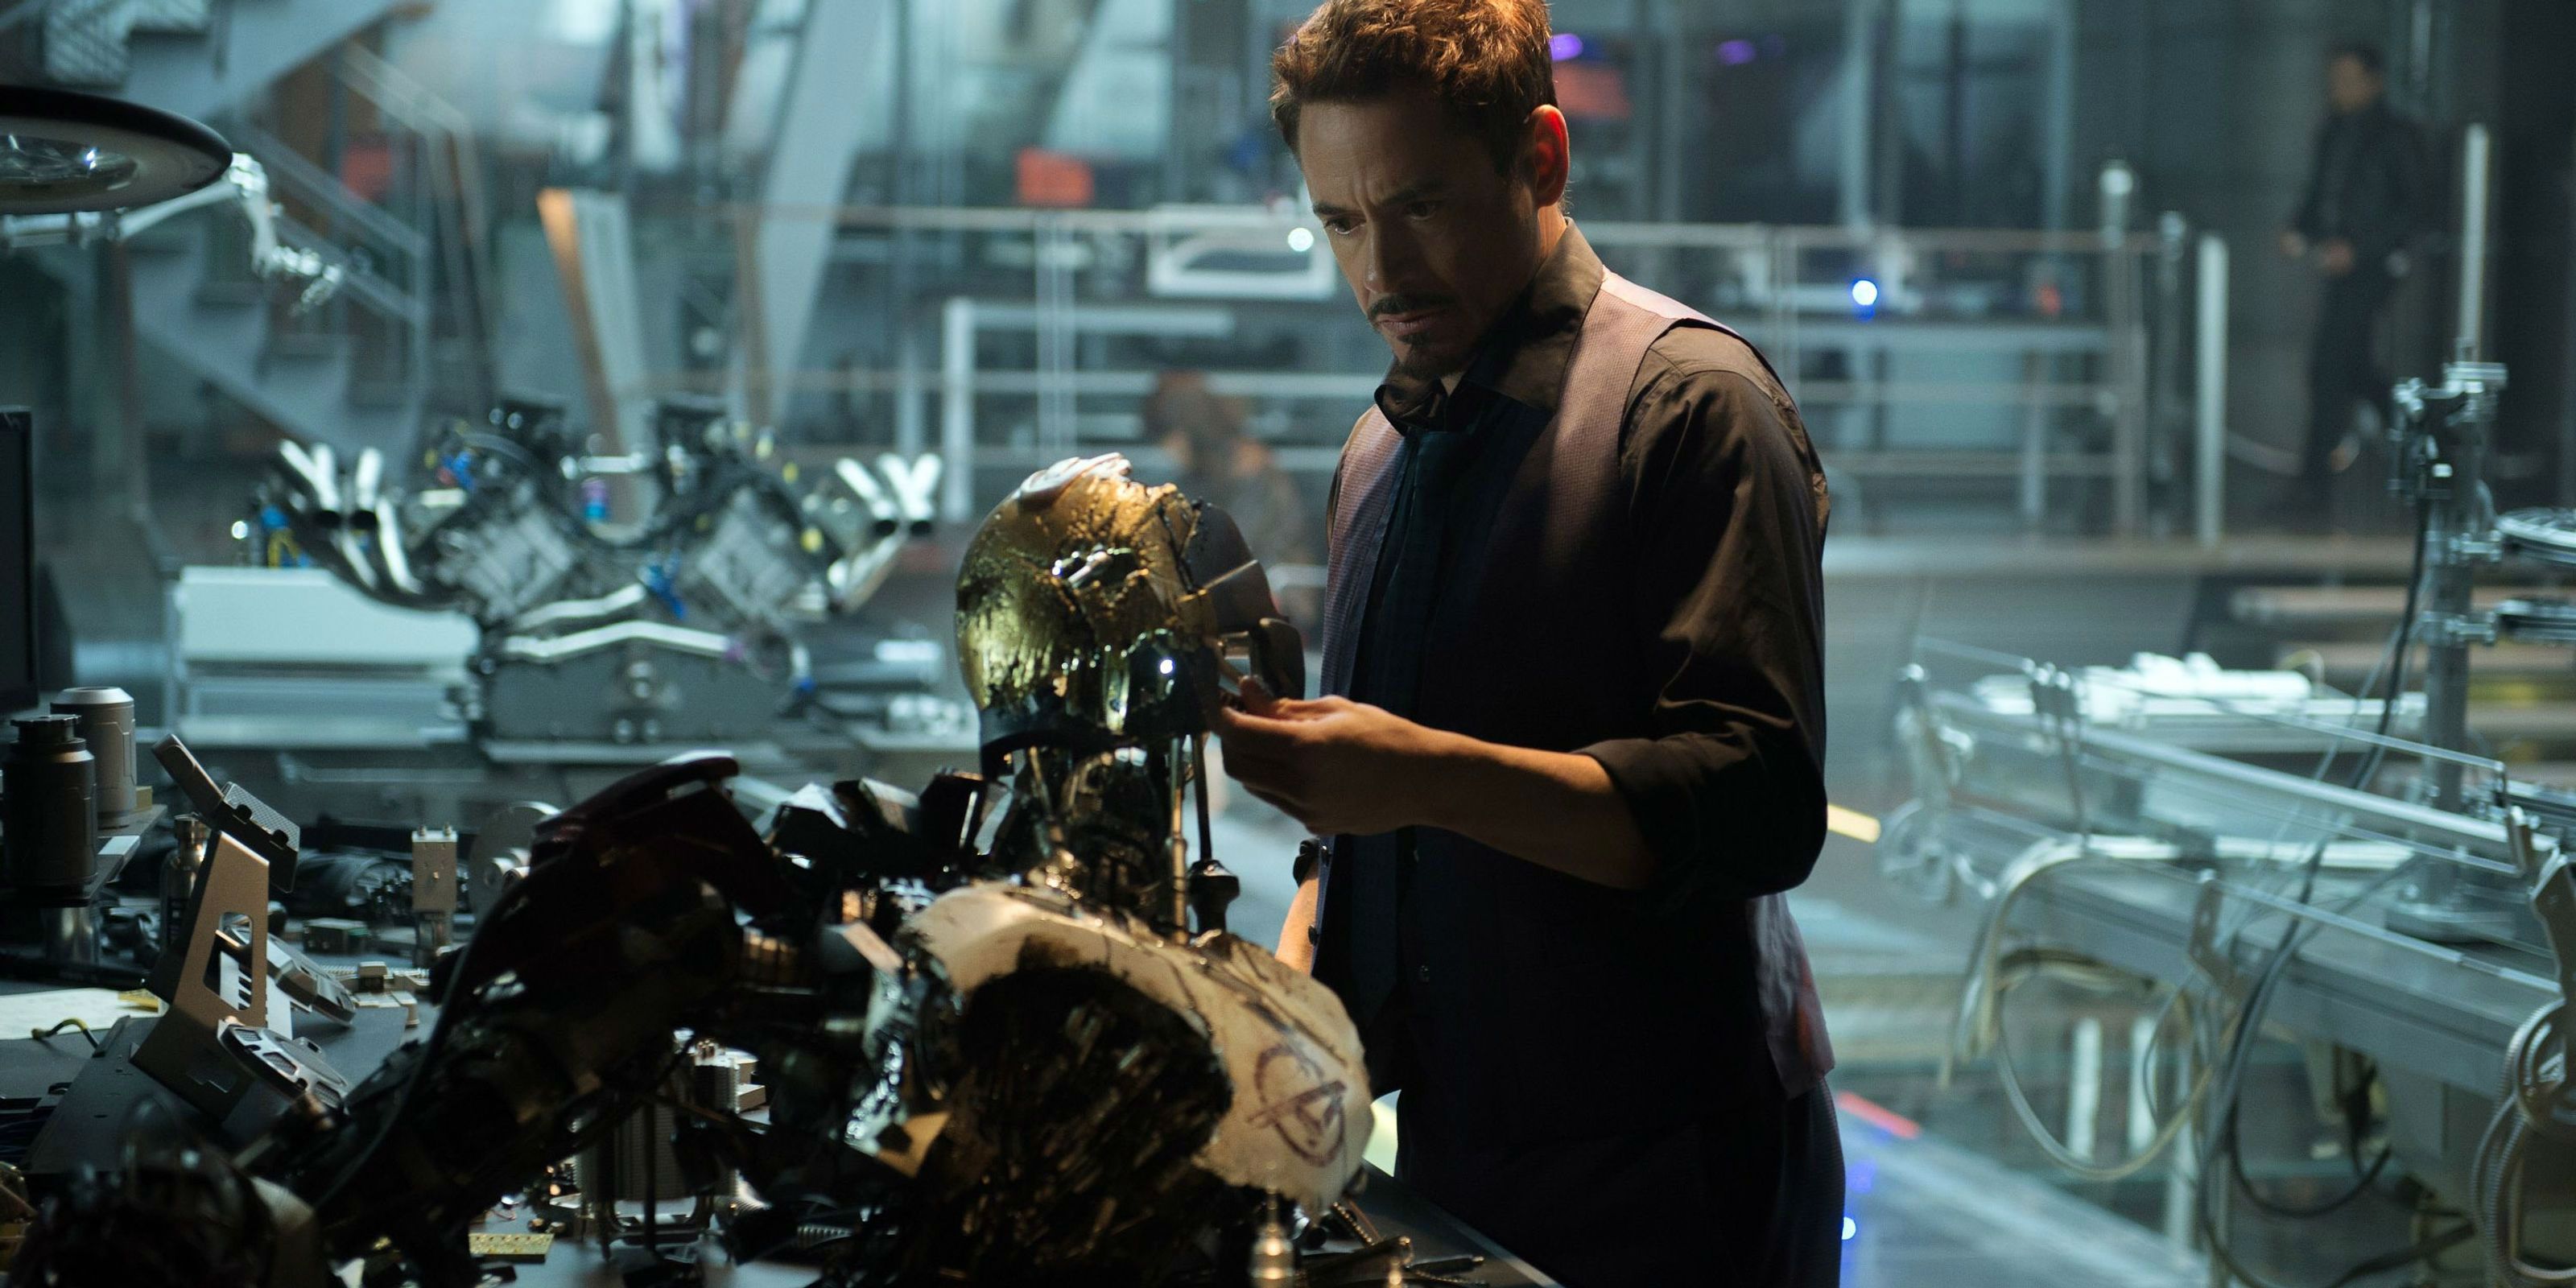 Avengers: Endgame Directors Say Tony Stark Was Right To Build Ultron